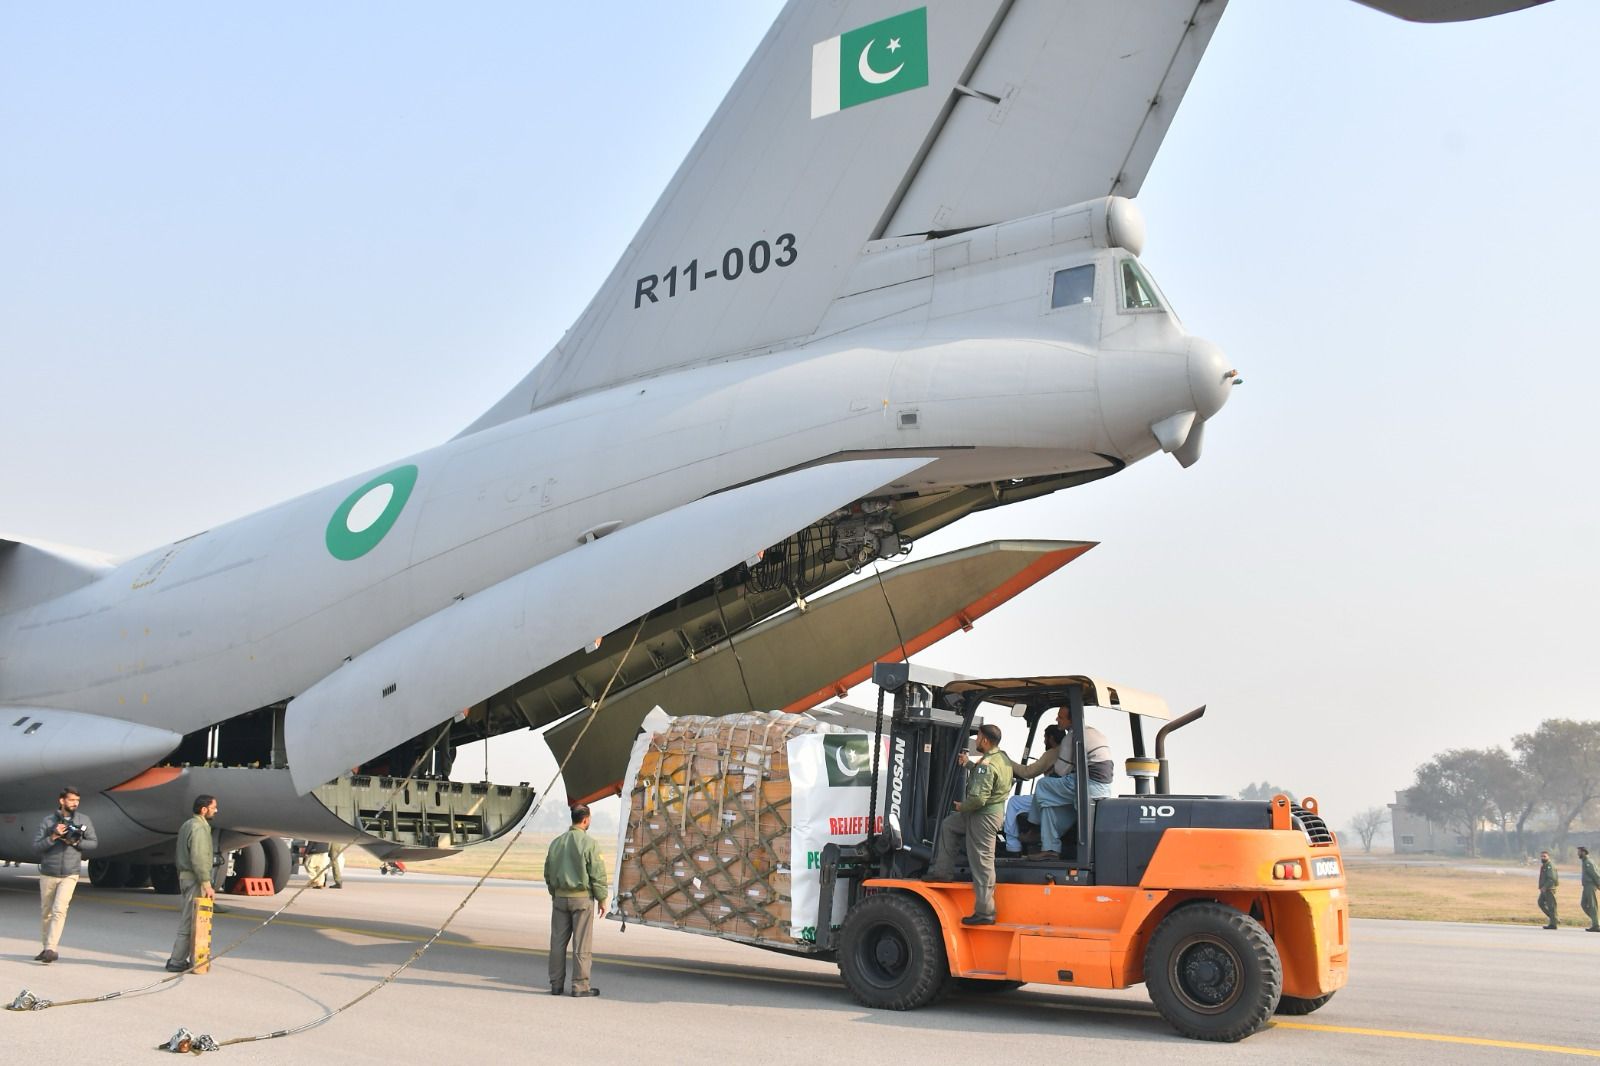 relief supplies to Gaza